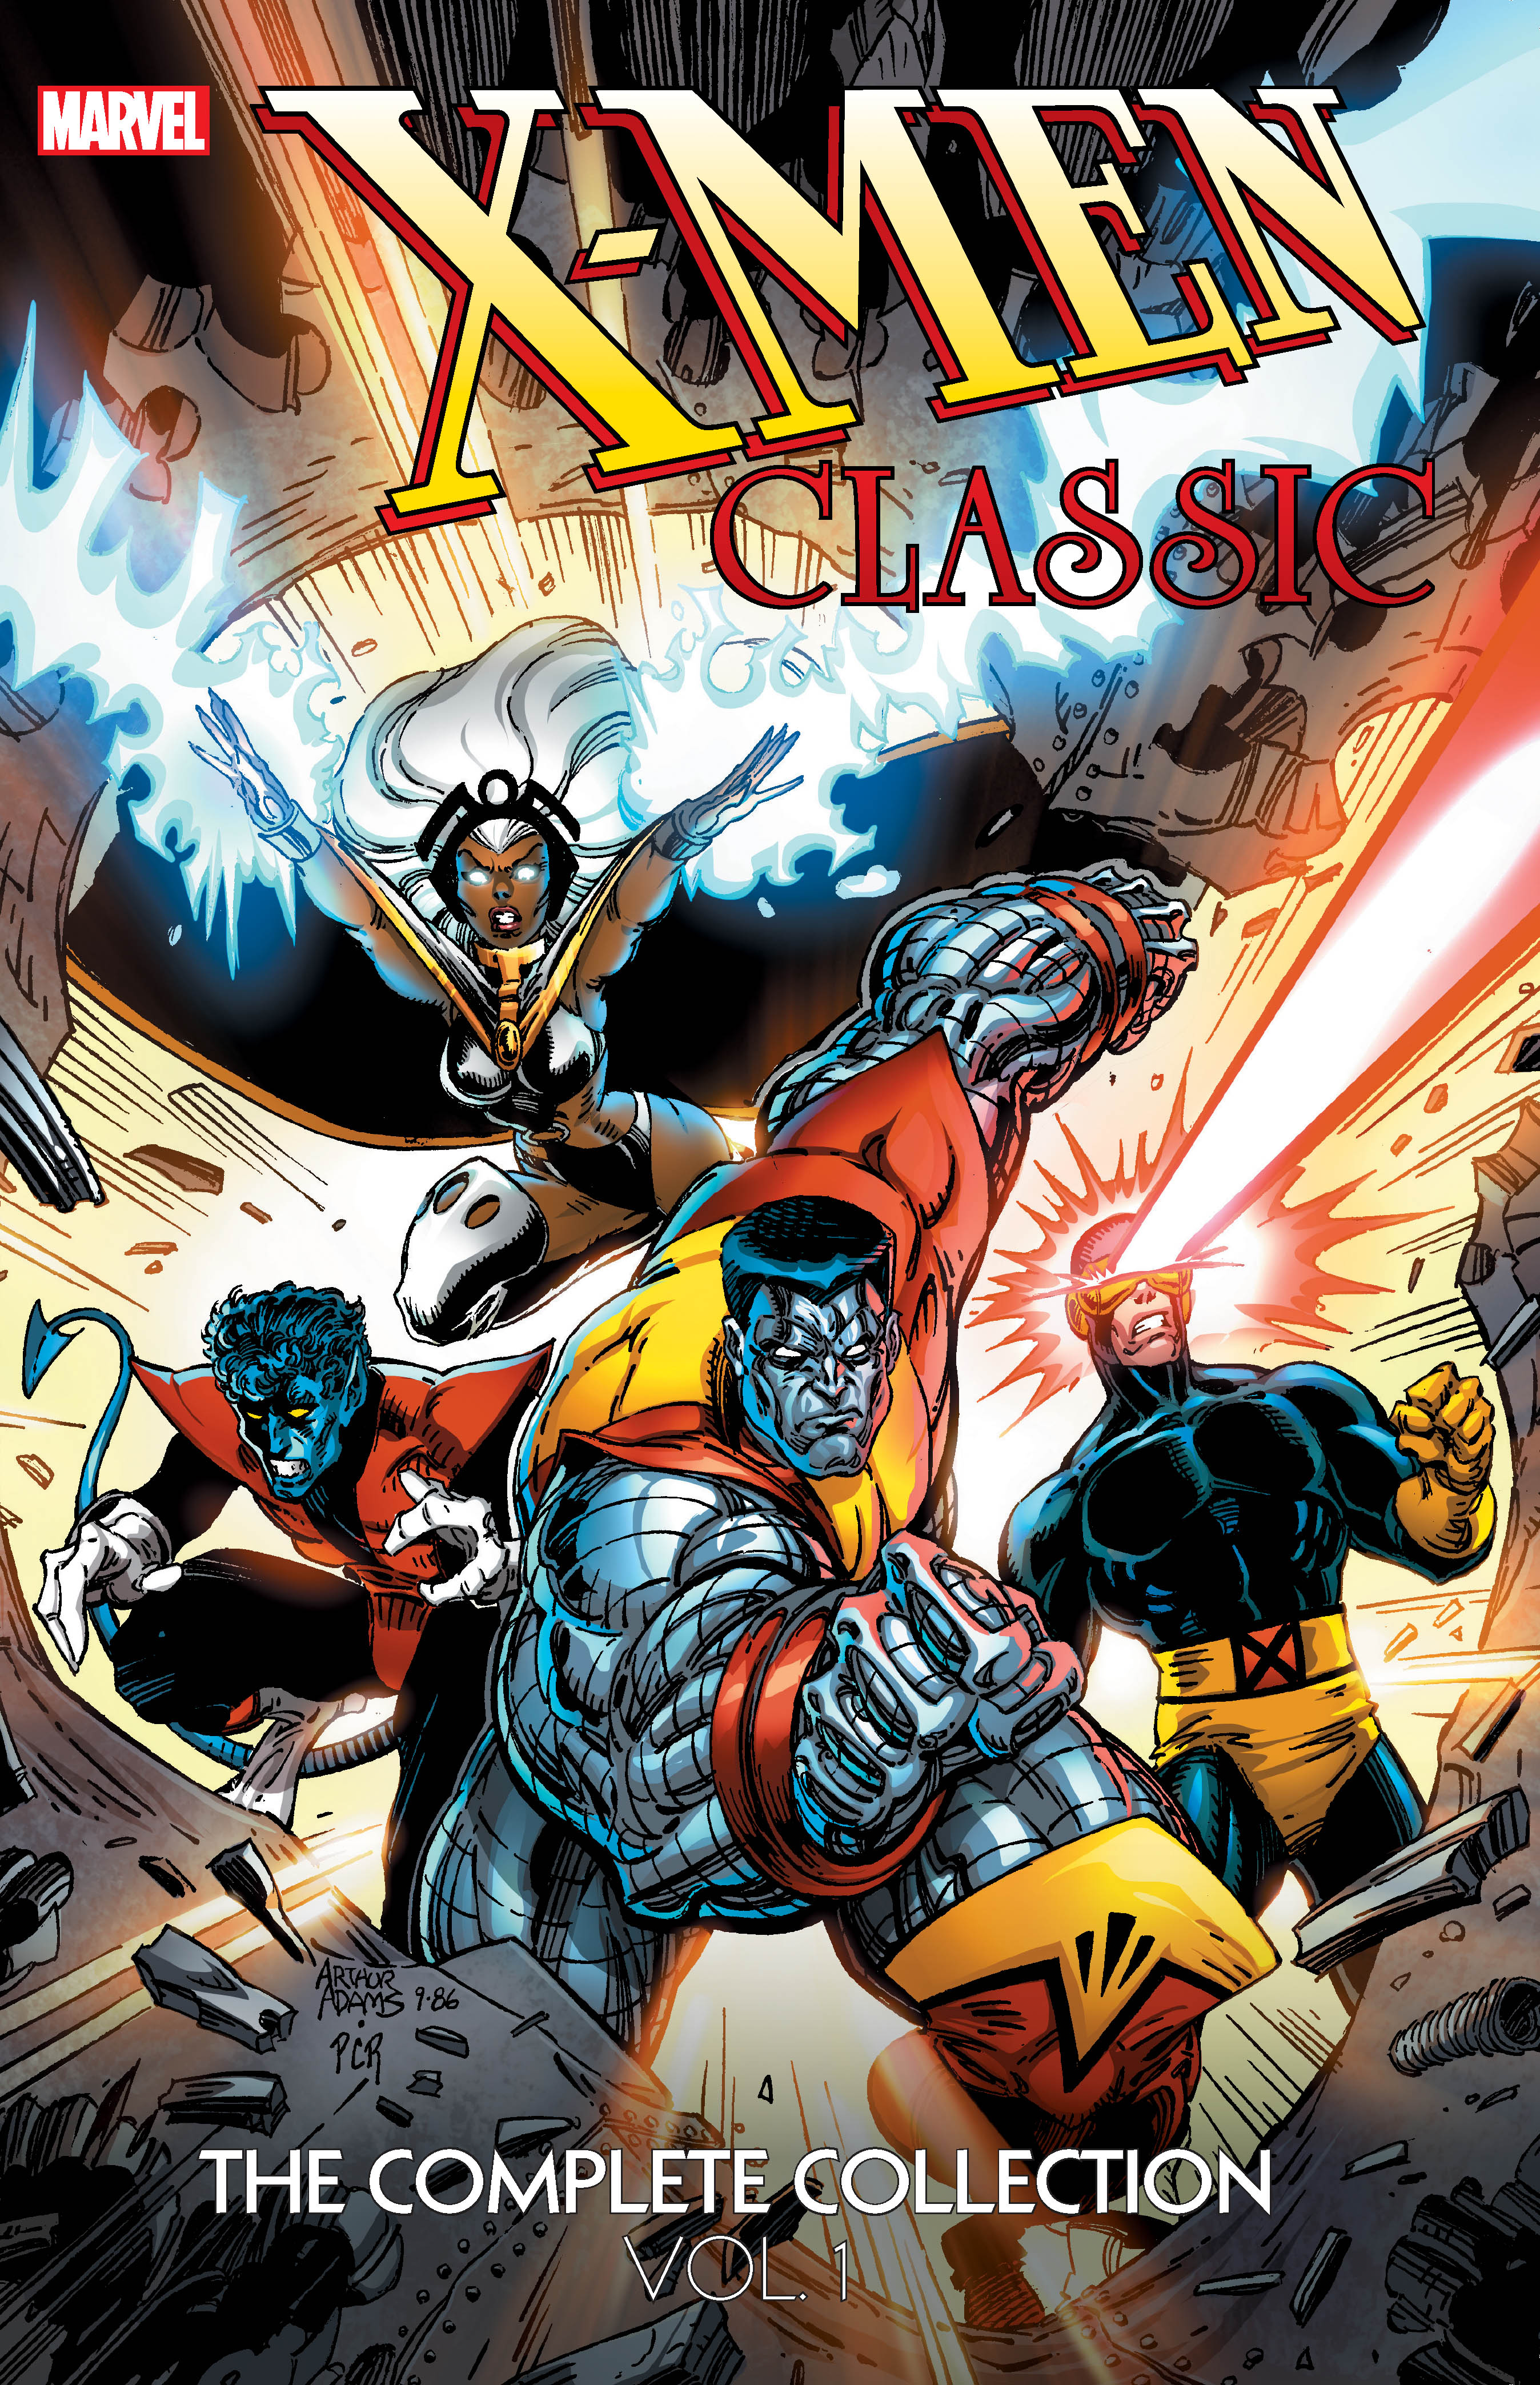 X-Men Classic: The Complete Collection Vol. 1 (Trade Paperback)